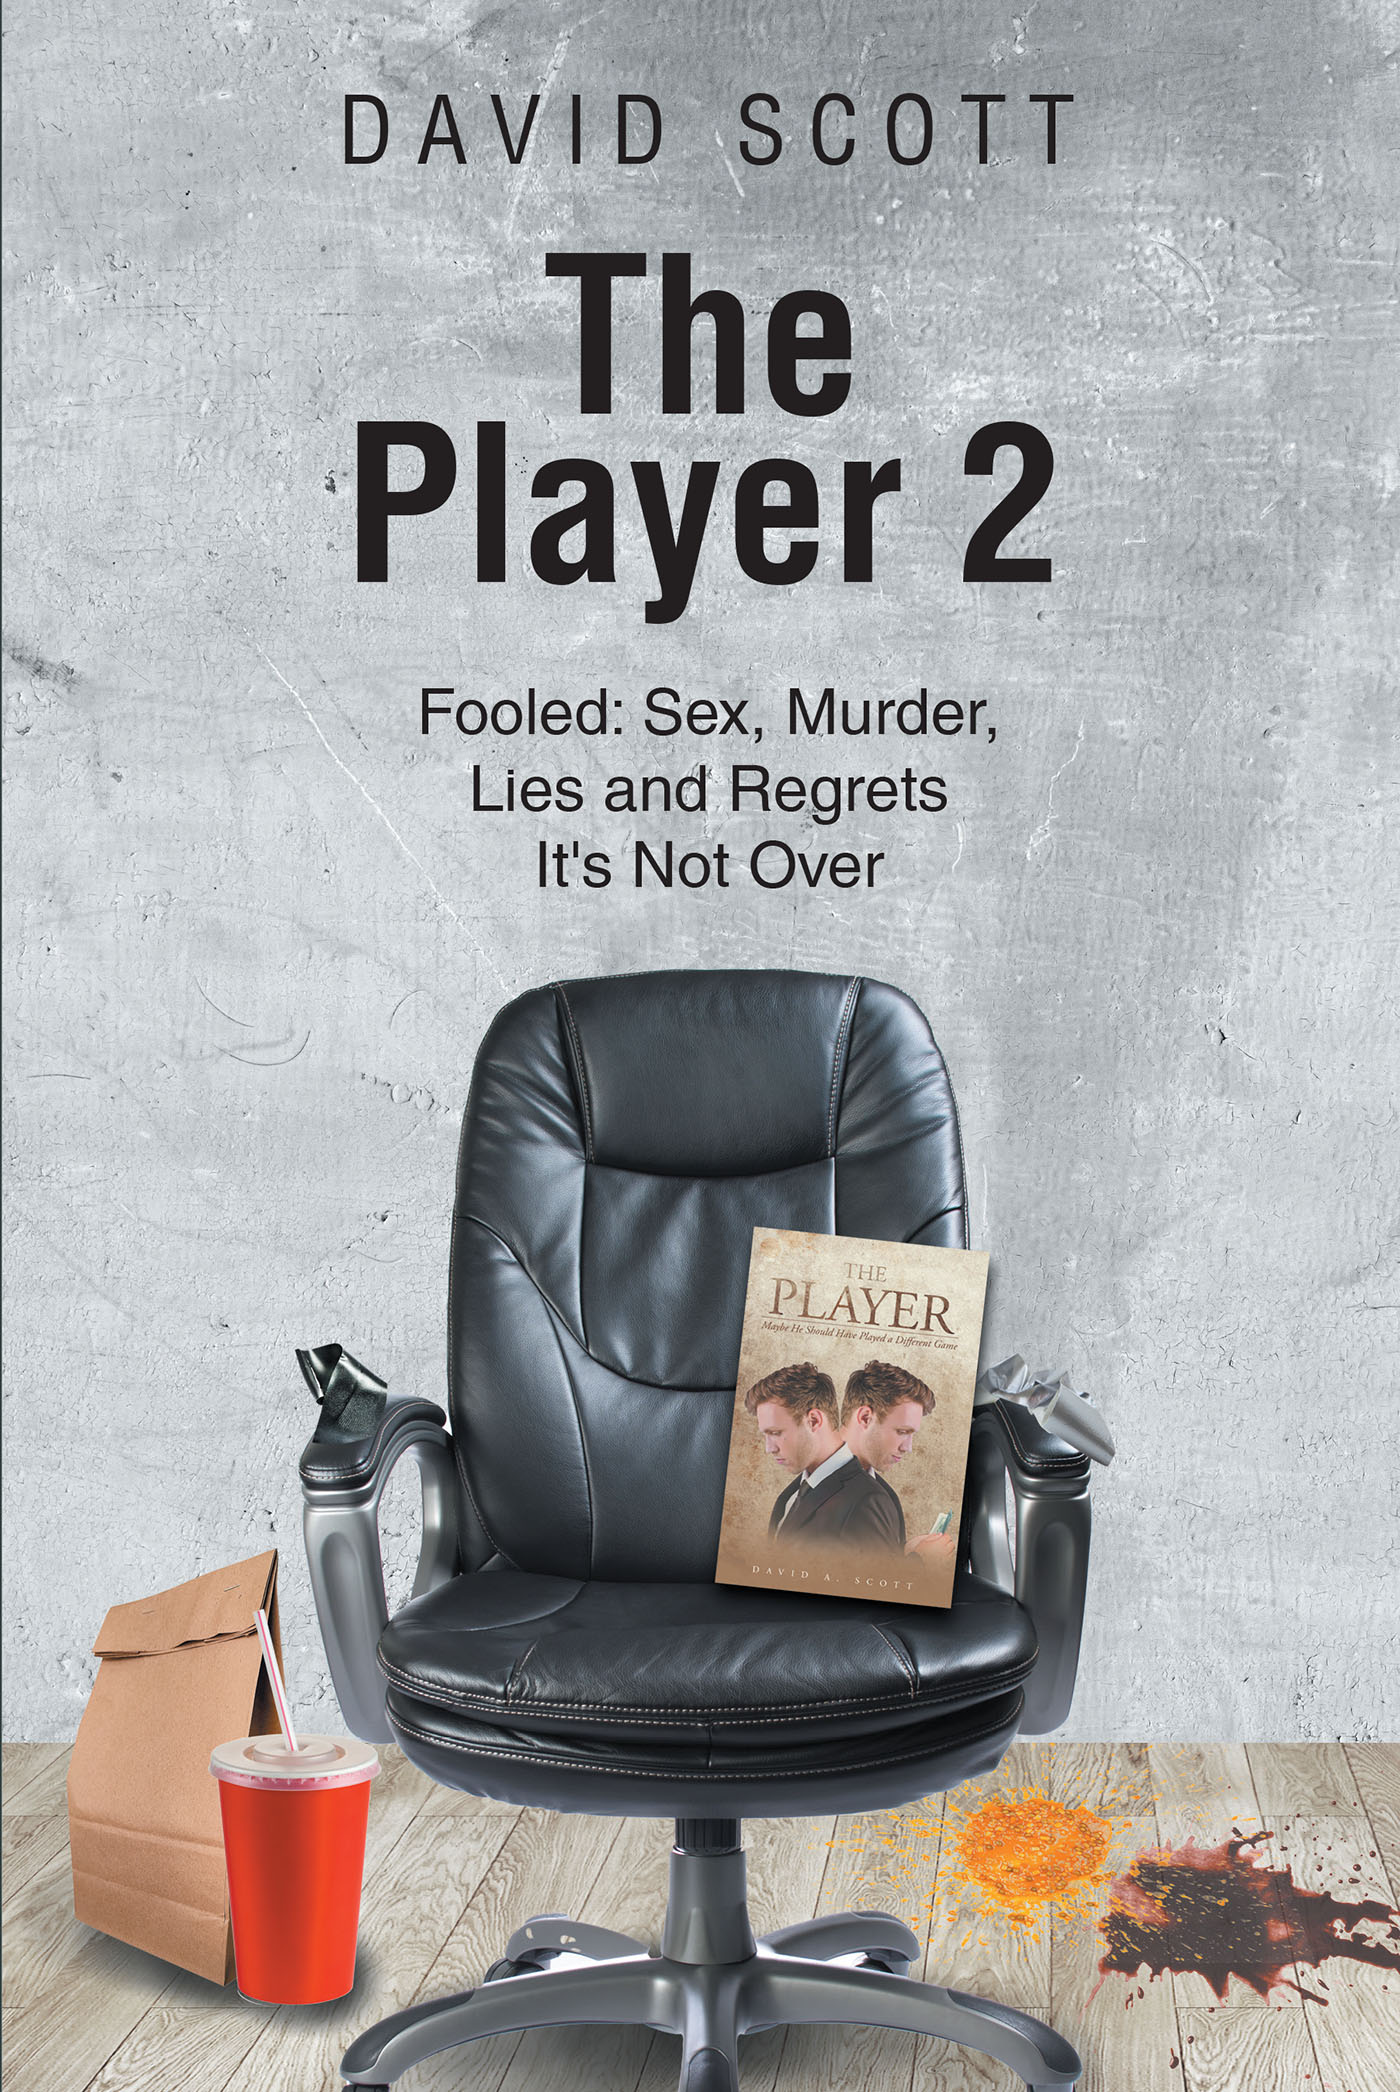 Author David Scott’s New Book "The Player 2: Sex, Lies, Murder, and Regrets—It’s Not Over" is the Intense Continuation of This Story, as David’s Past Catches Up with Him